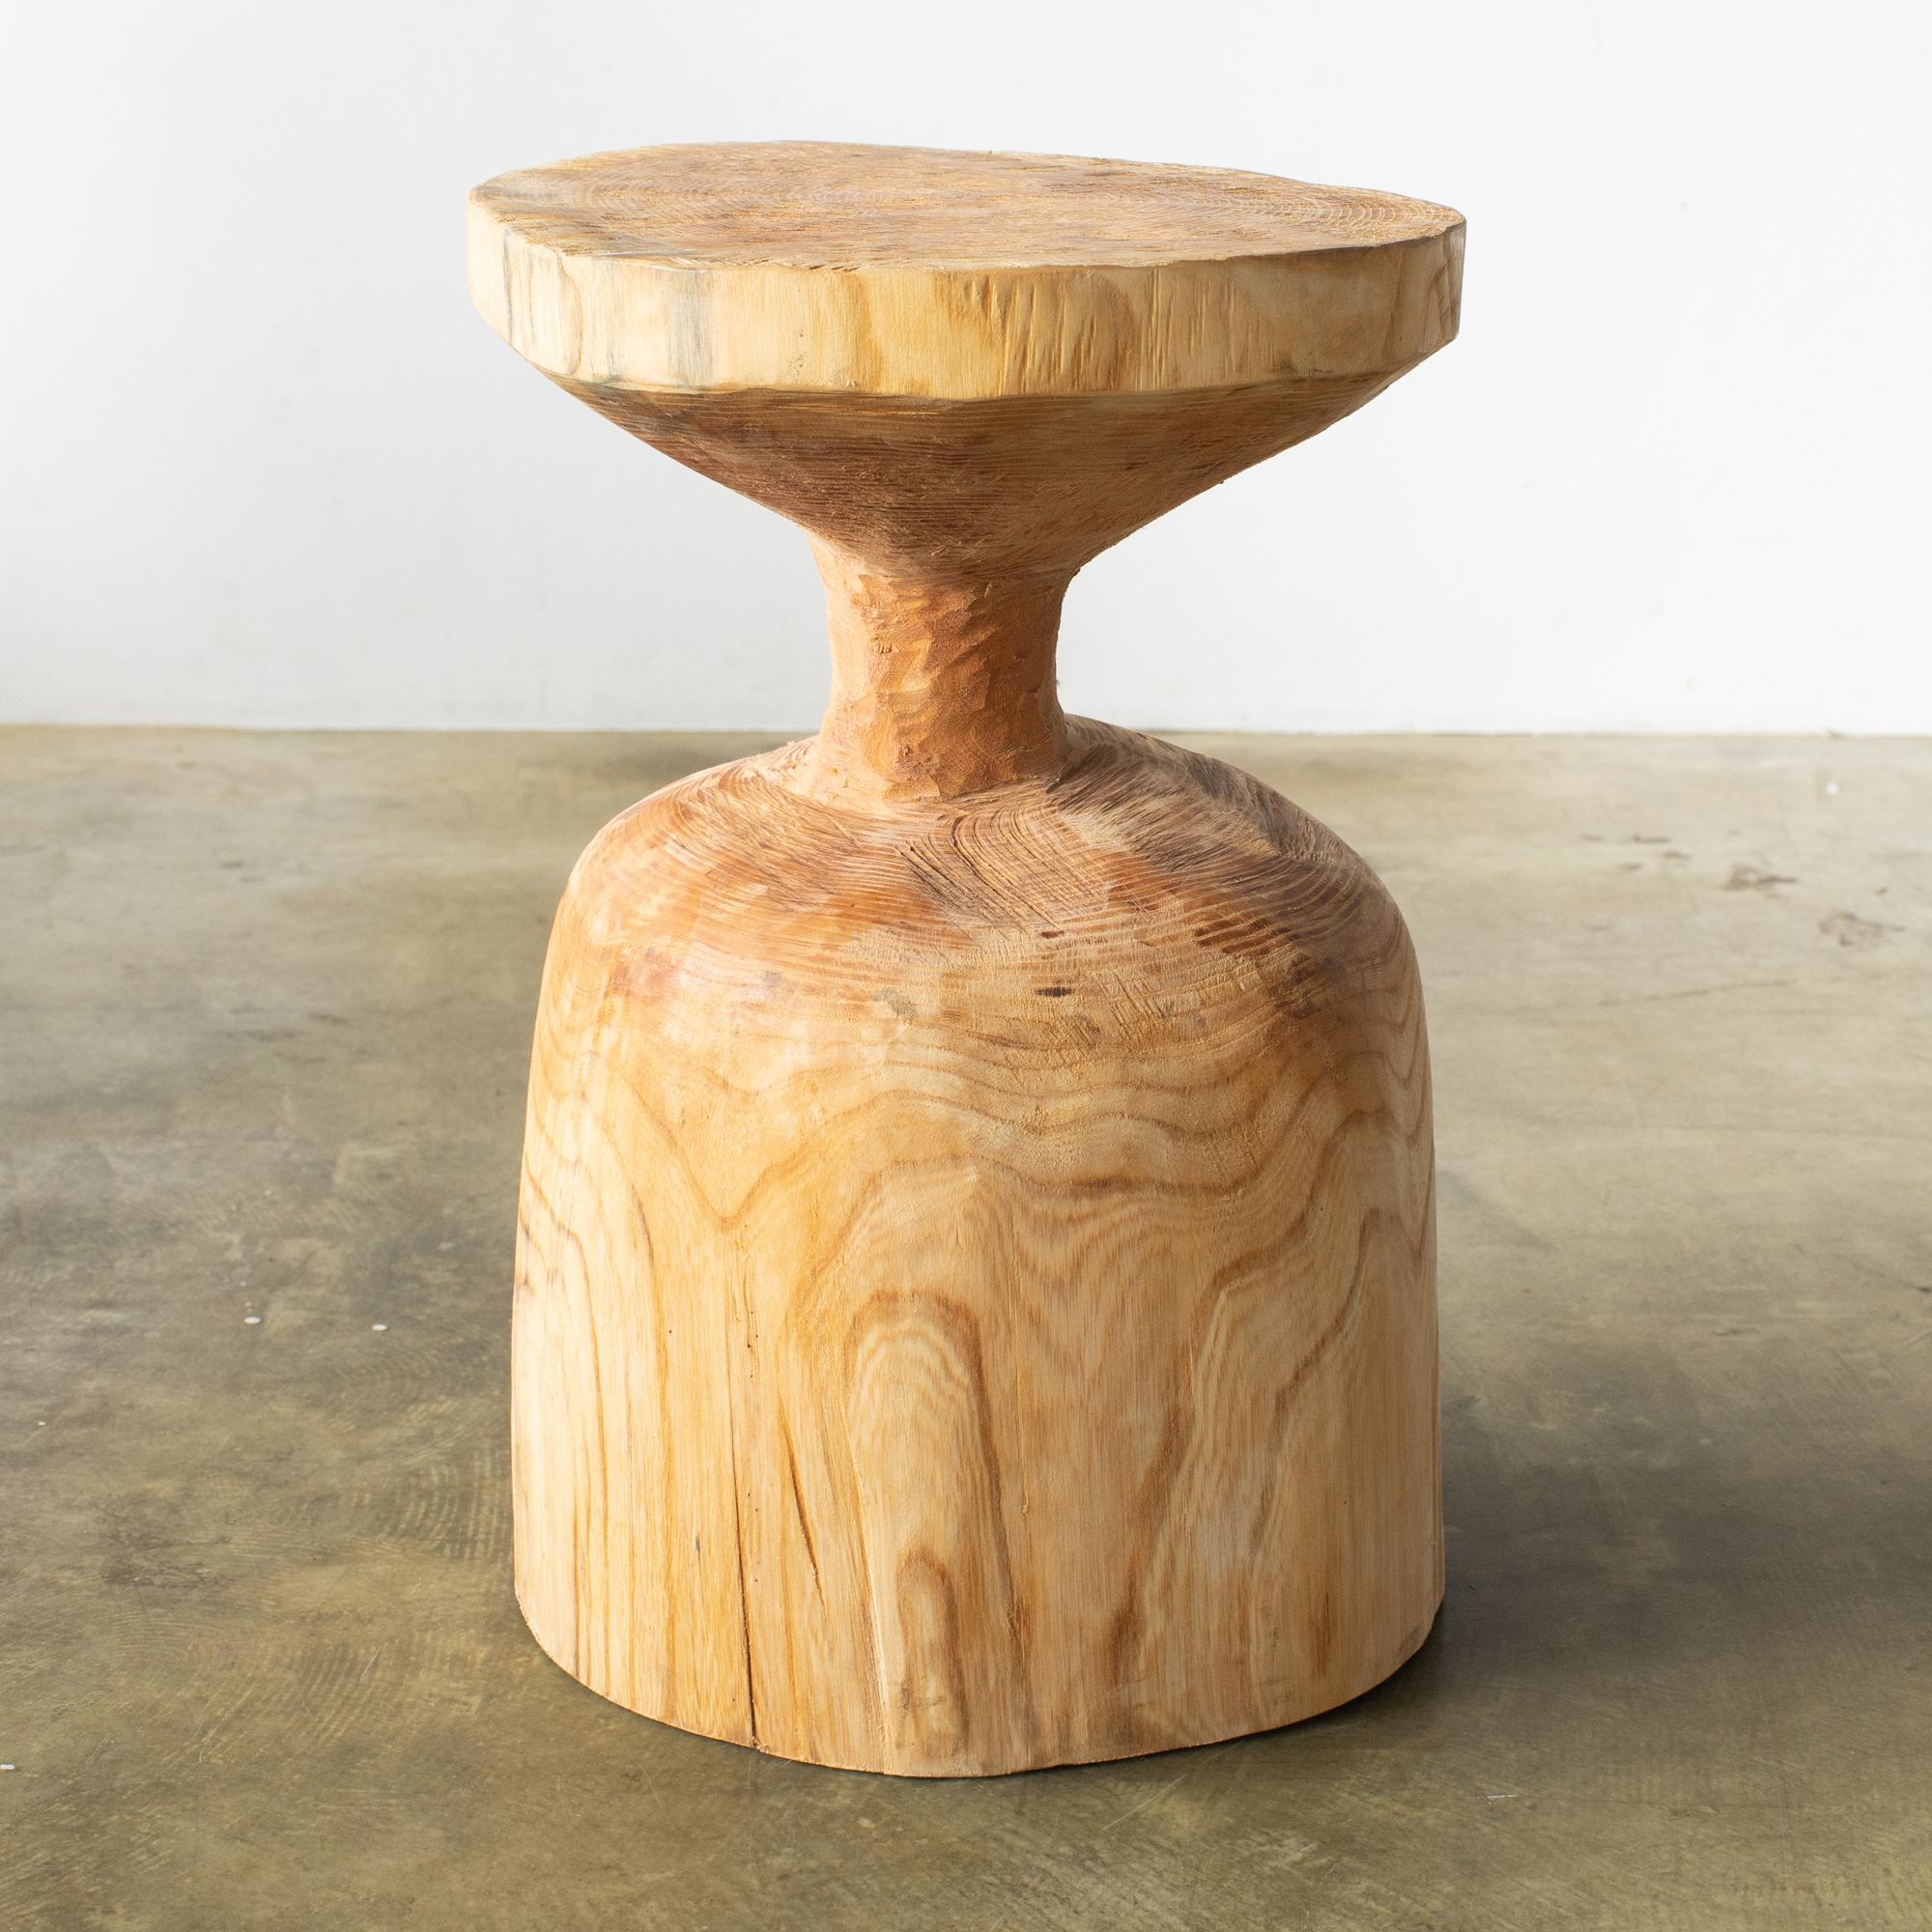 Hand-Carved Hiroyuki Nishimura and Sculptural Wood Stool Side Table 9-07 Tribal Glamping For Sale